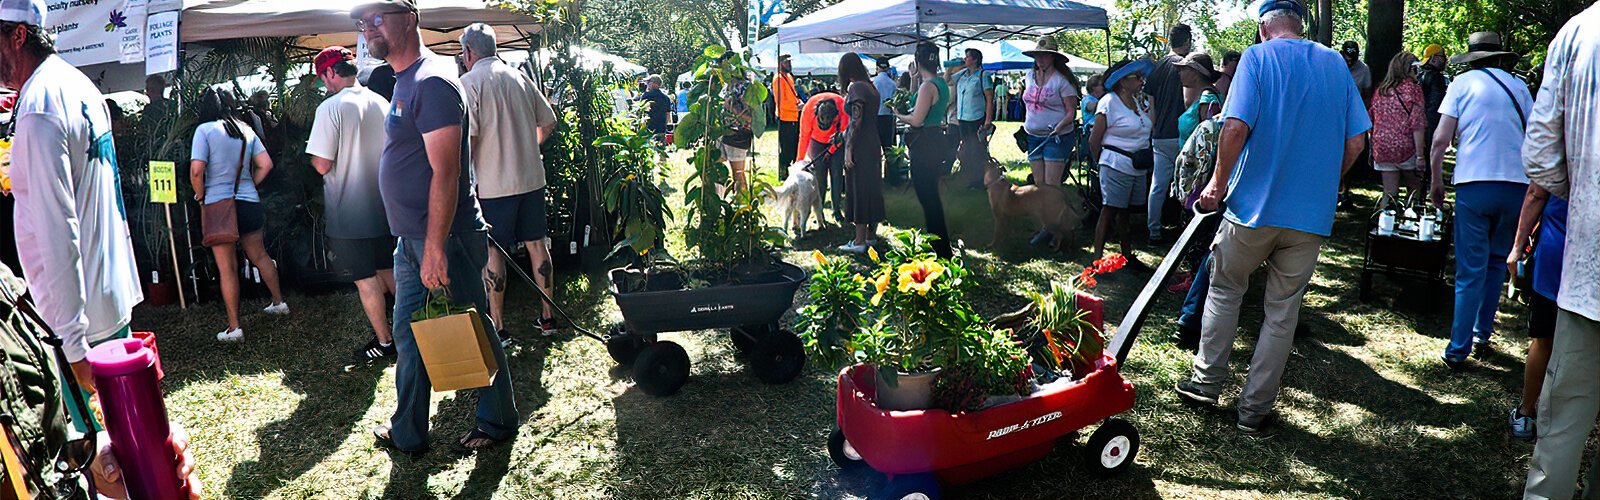 St. Pete's annual Green Thumb Festival has estimated attendance of 30,000 to 35,000 over the two-day event.